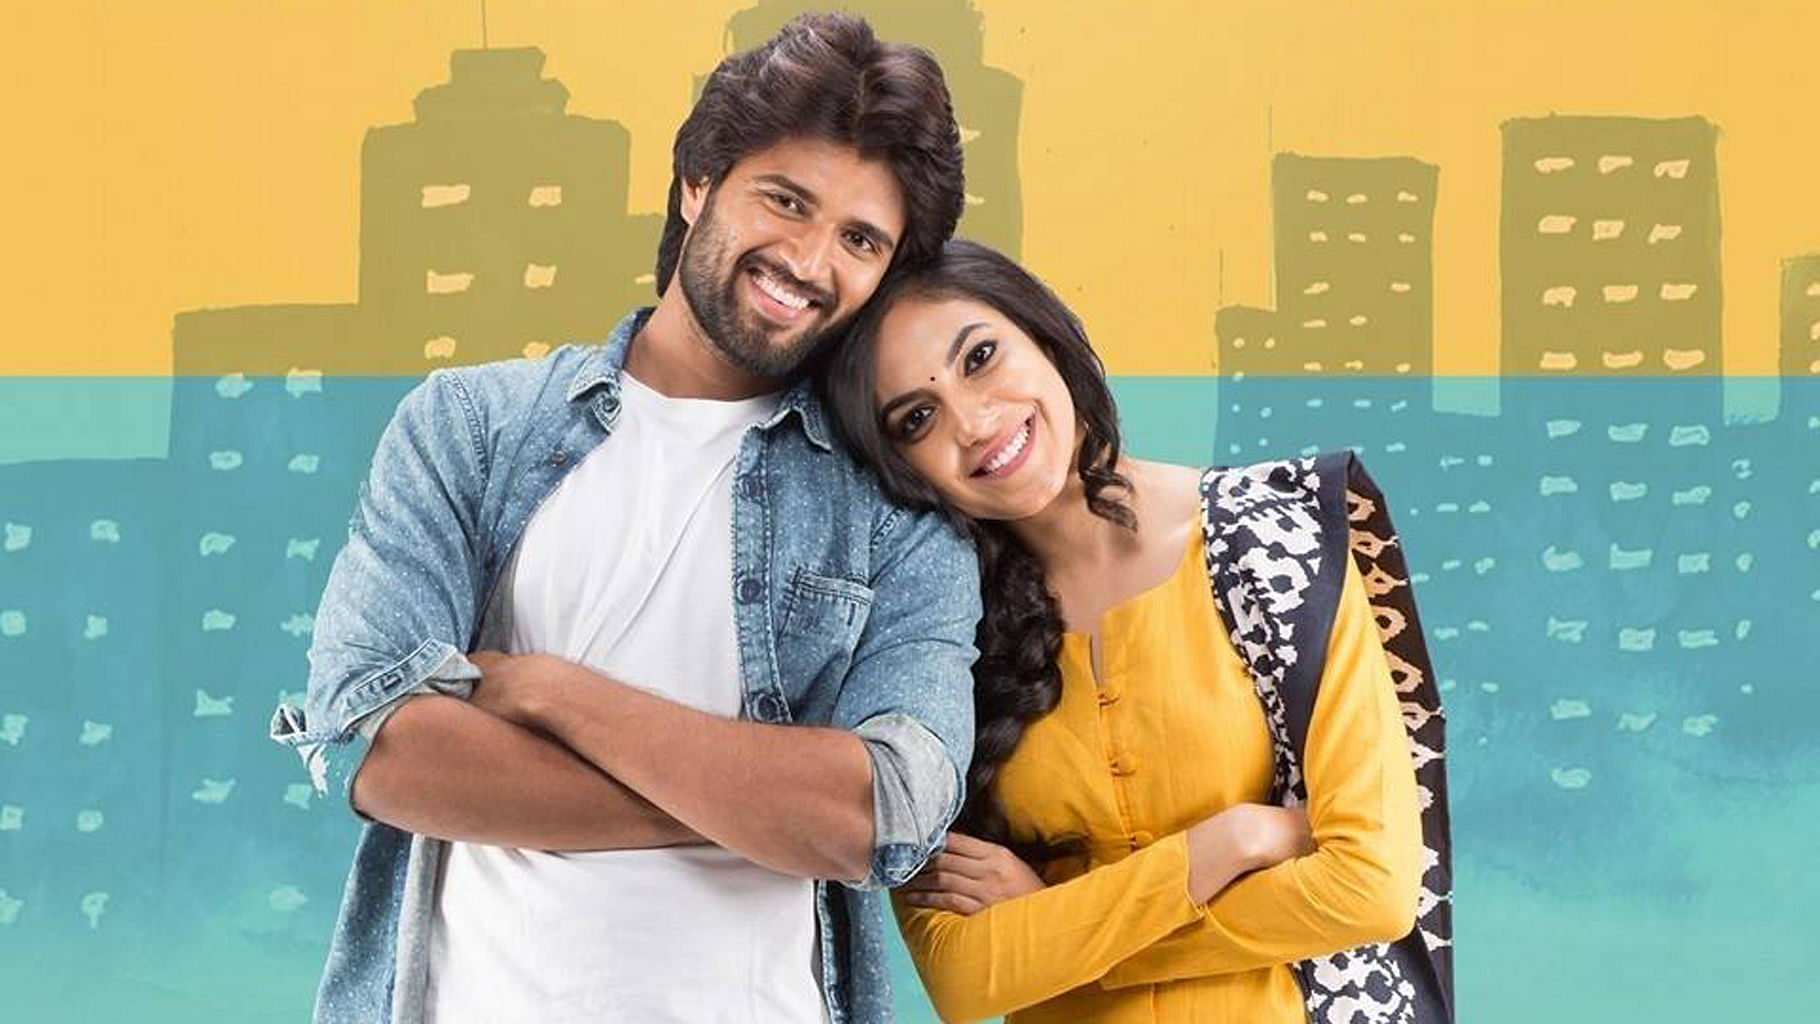 Telugu movie Pelli Chupulu has surprised everyone (literally) by becoming a hit, being awesome and being fresh! (Photo: YouTube / Telugu Filmnagar)